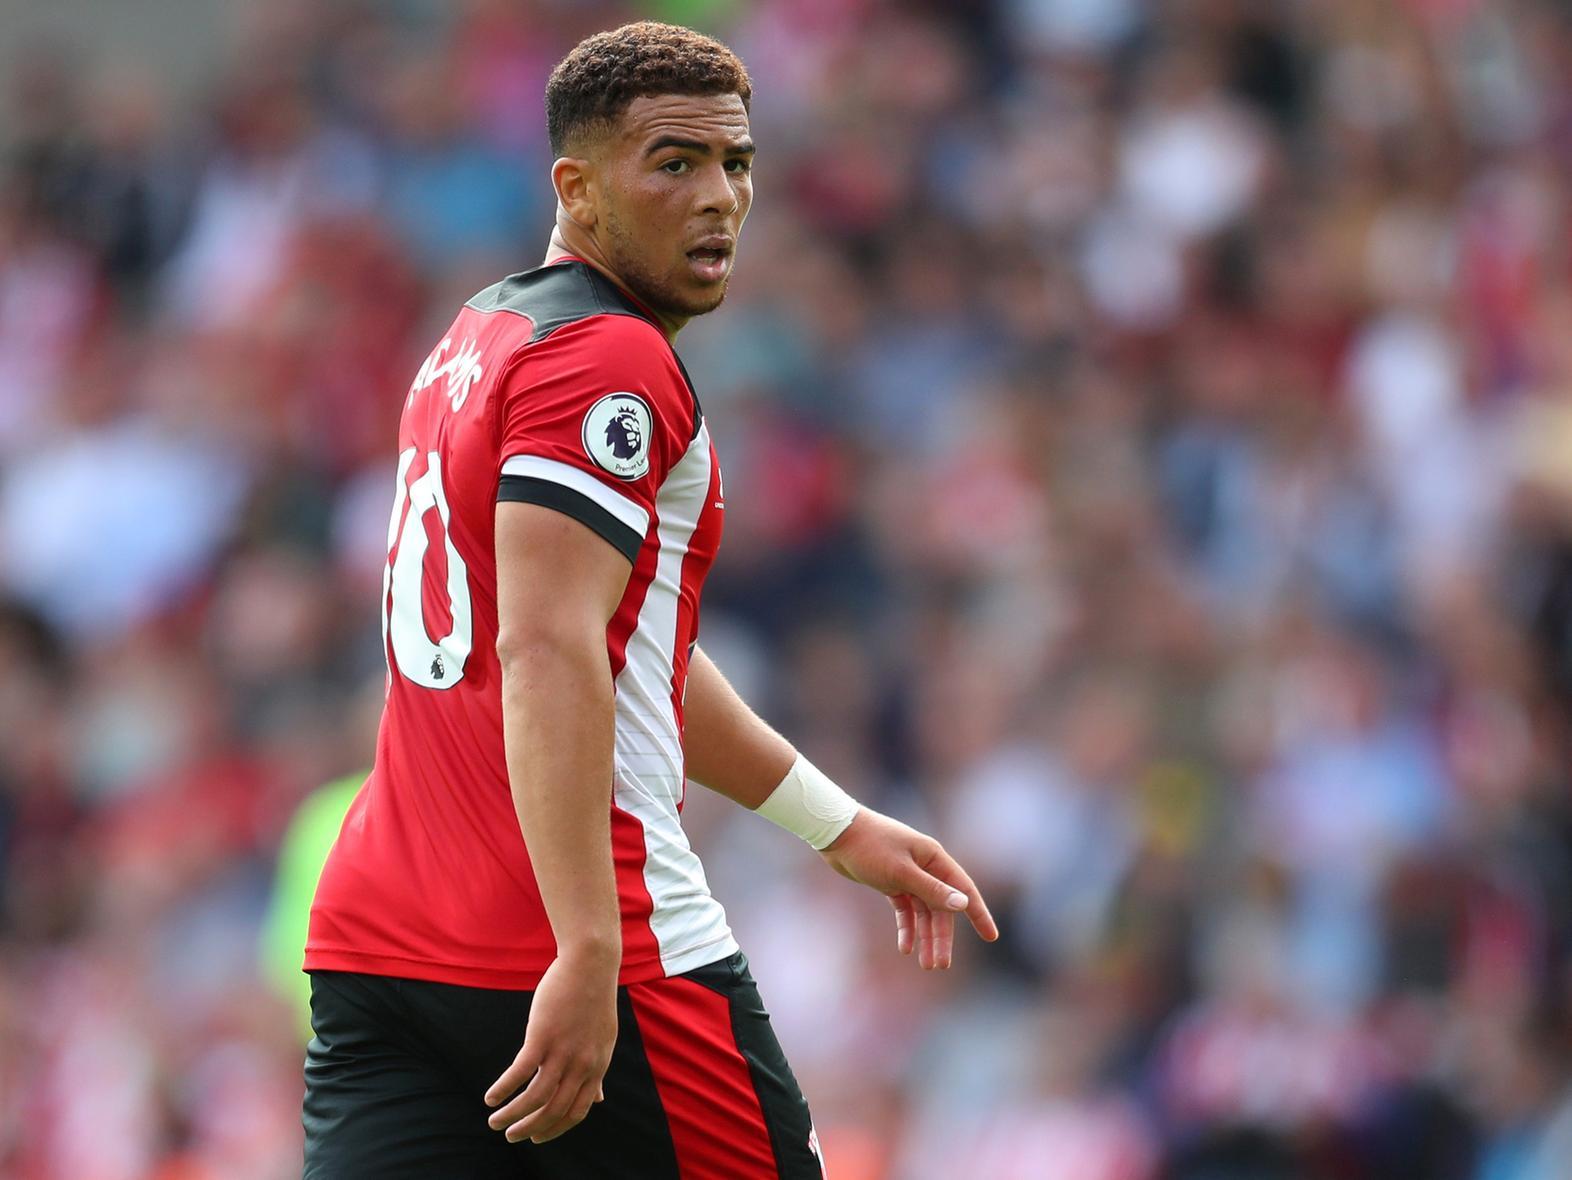 Leeds United are believed to be keen on bringing in Southampton forward Che Adams on loan, but face stiff competition from Nottingham Forest in their apparent pursuit of the deal. (Birmingham Mail)